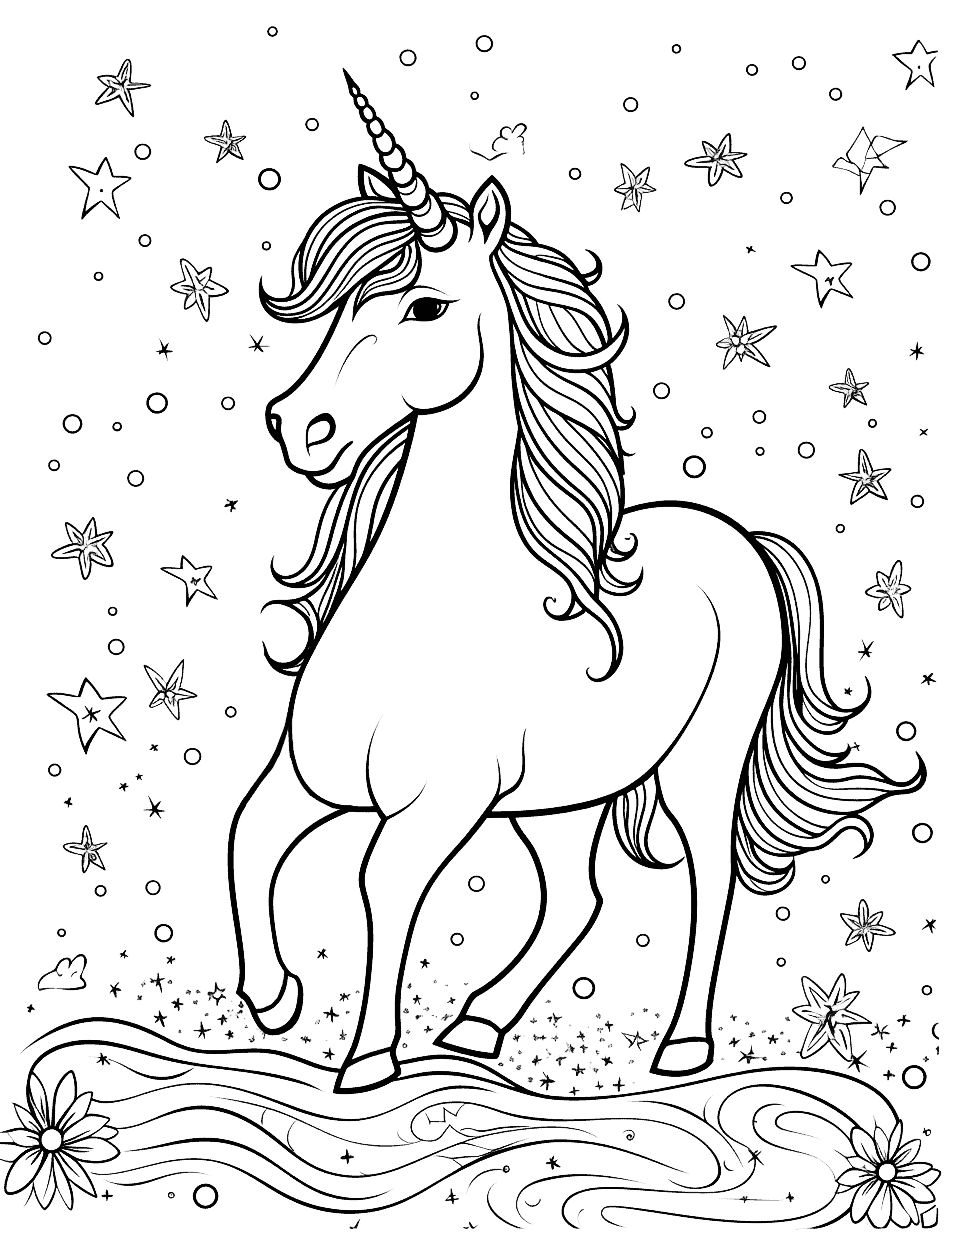 Unicorn and Snowflakes Coloring Page - A winter-themed coloring page with a unicorn under a gentle snowfall, surrounded by detailed snowflakes.